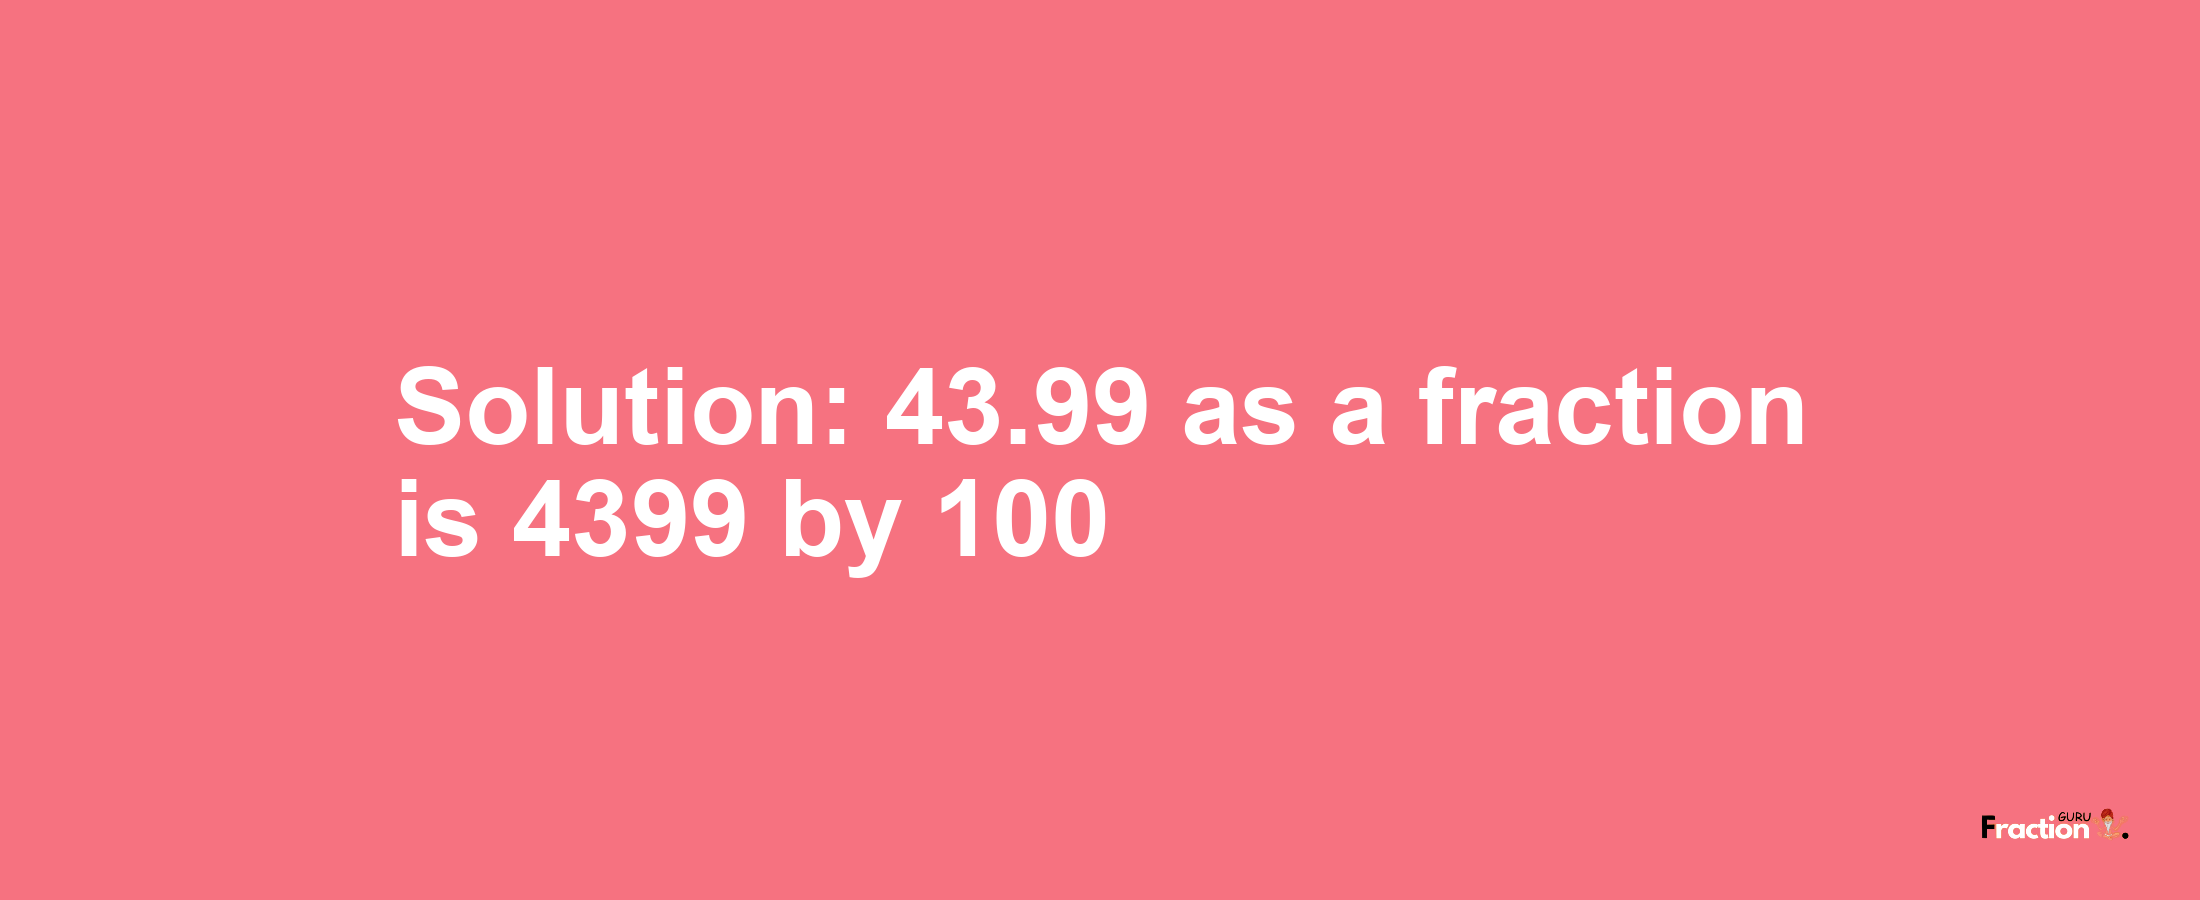 Solution:43.99 as a fraction is 4399/100